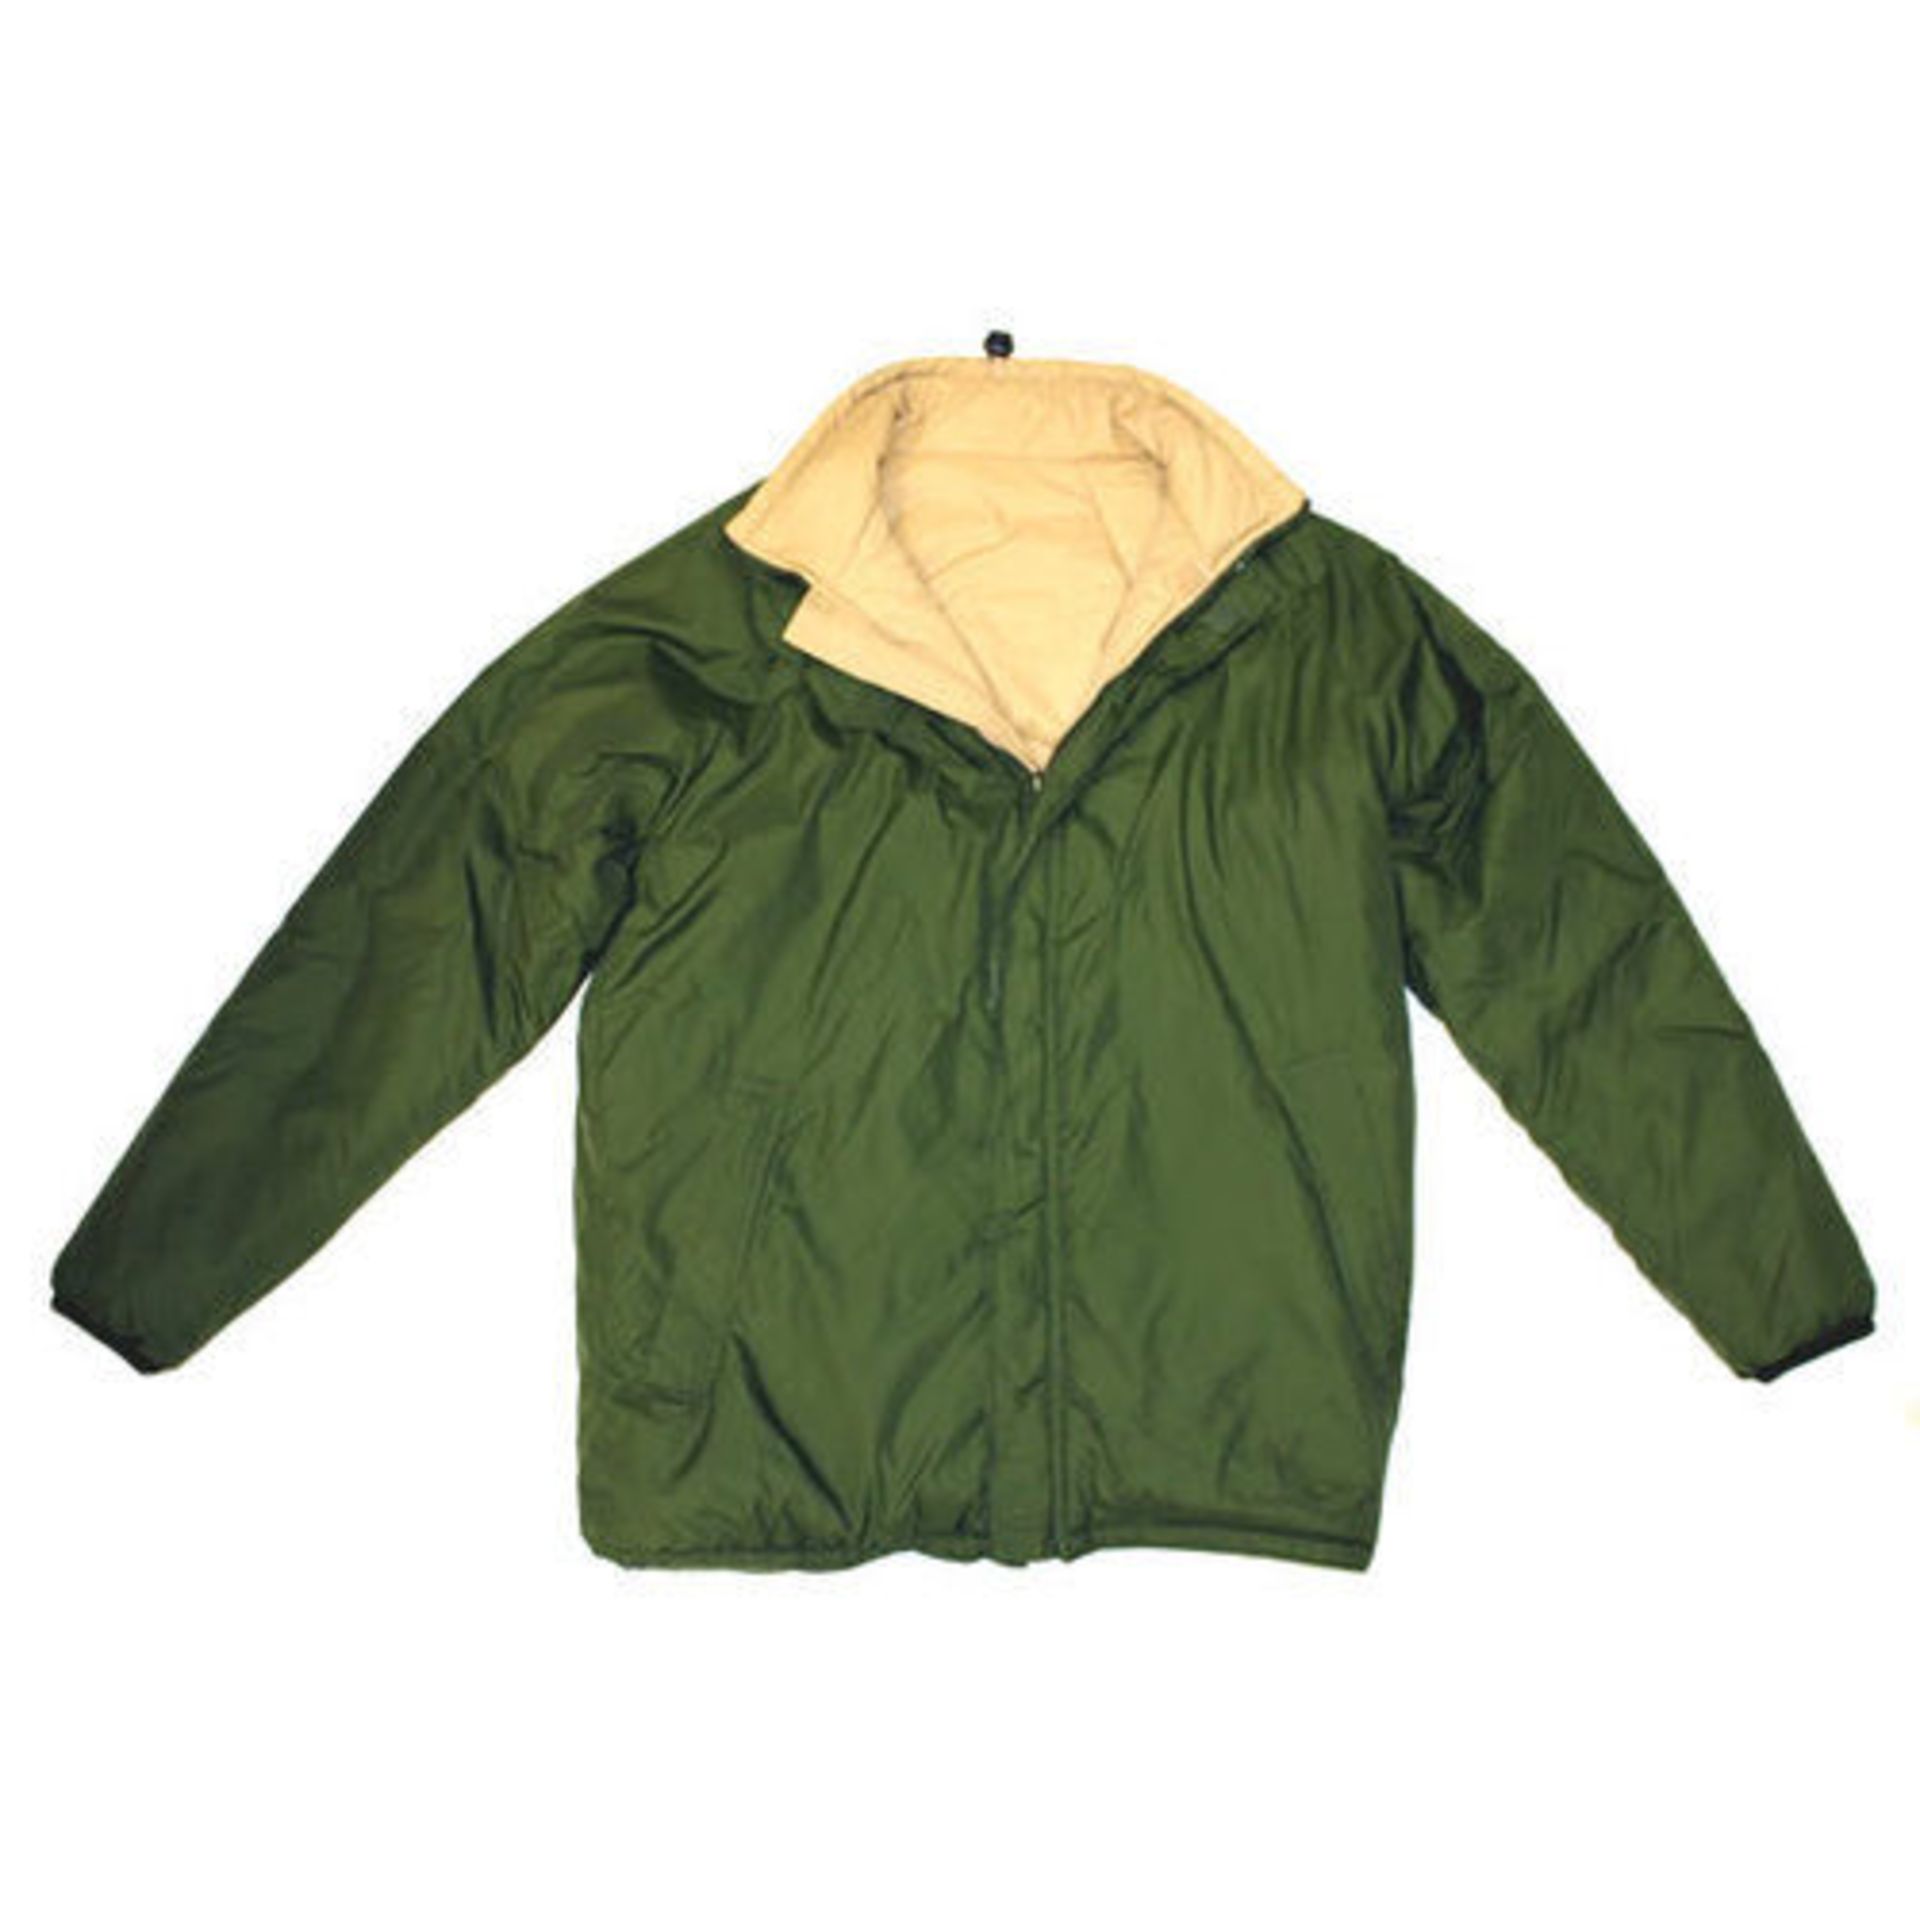 5 x Soft Thermal Reversible Over Jacket - Olive Green - Large - NEW - Image 2 of 2